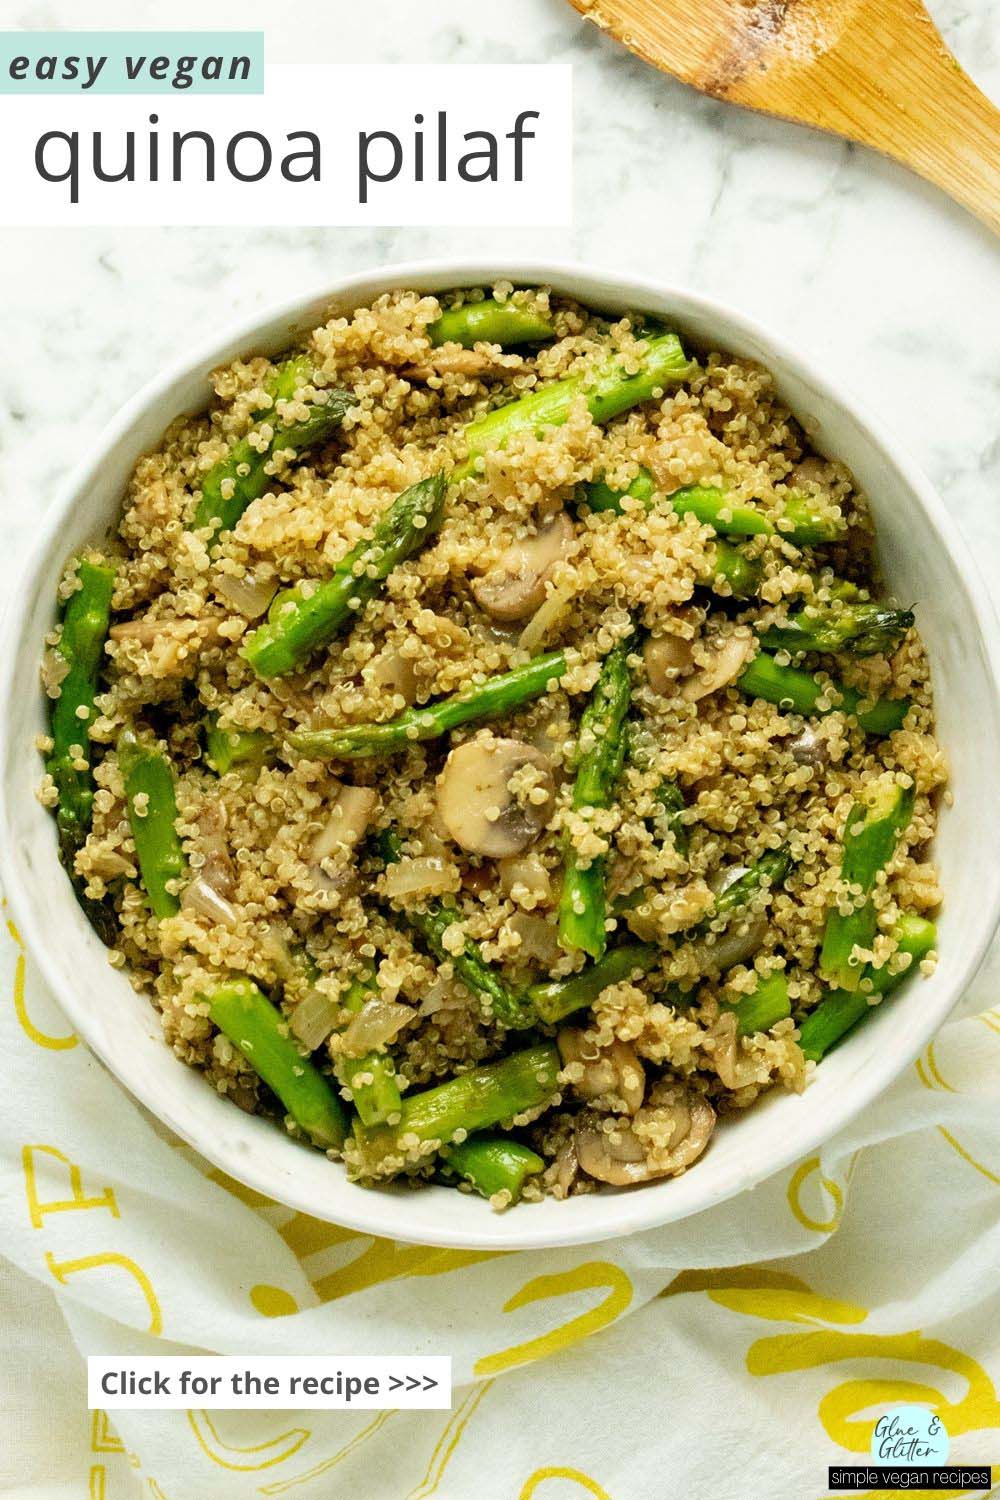 bowl of quinoa pilaf with mushrooms and asparagus, text overlay